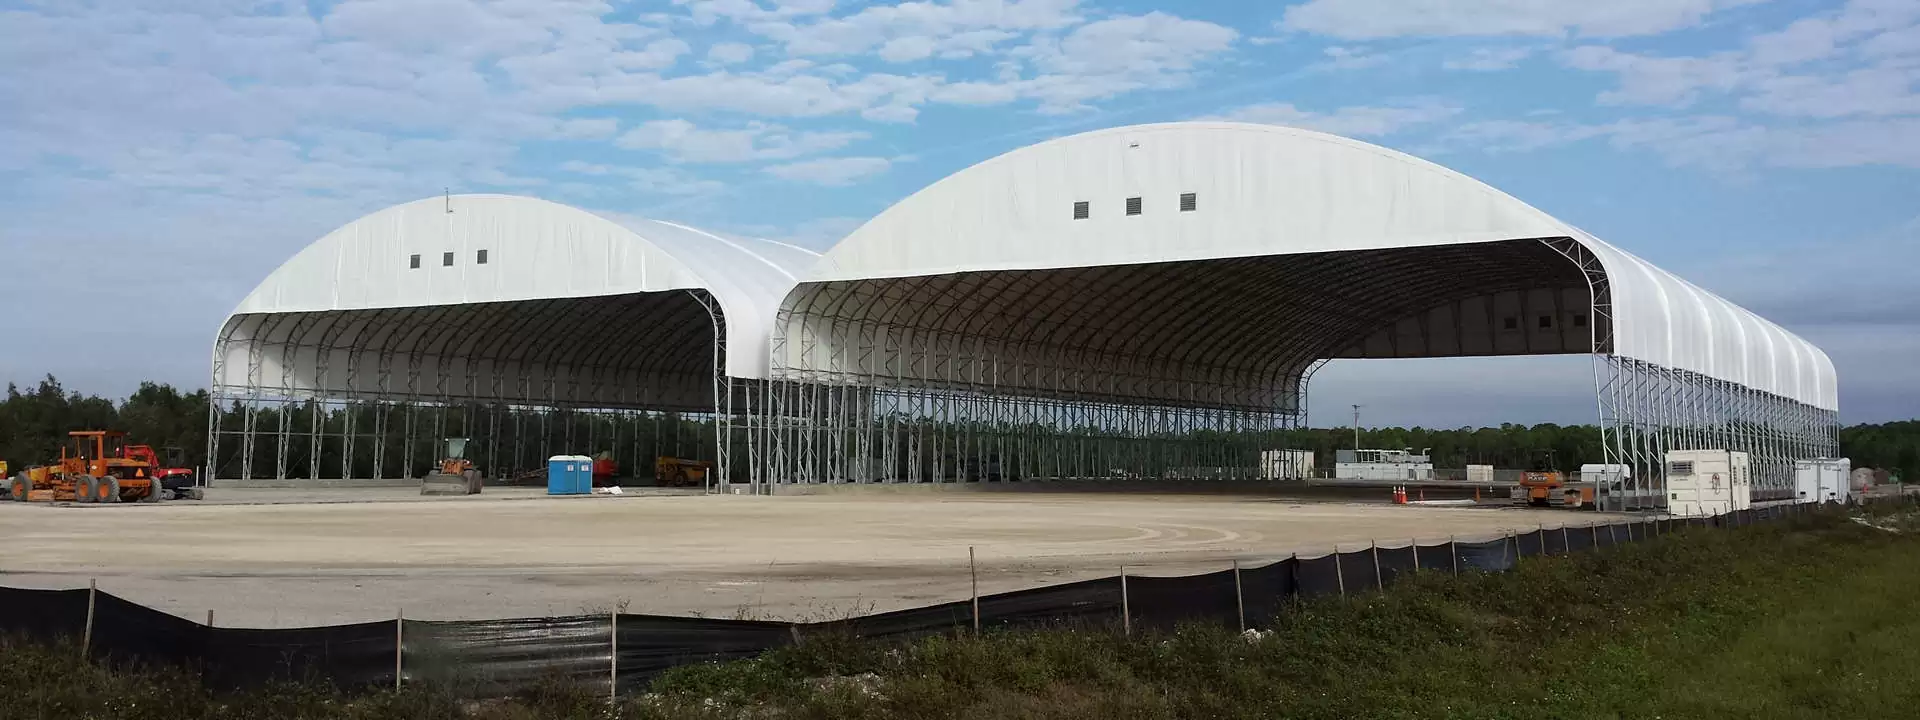 Fabric Covered Storage Buildings | Big Top Warehouses